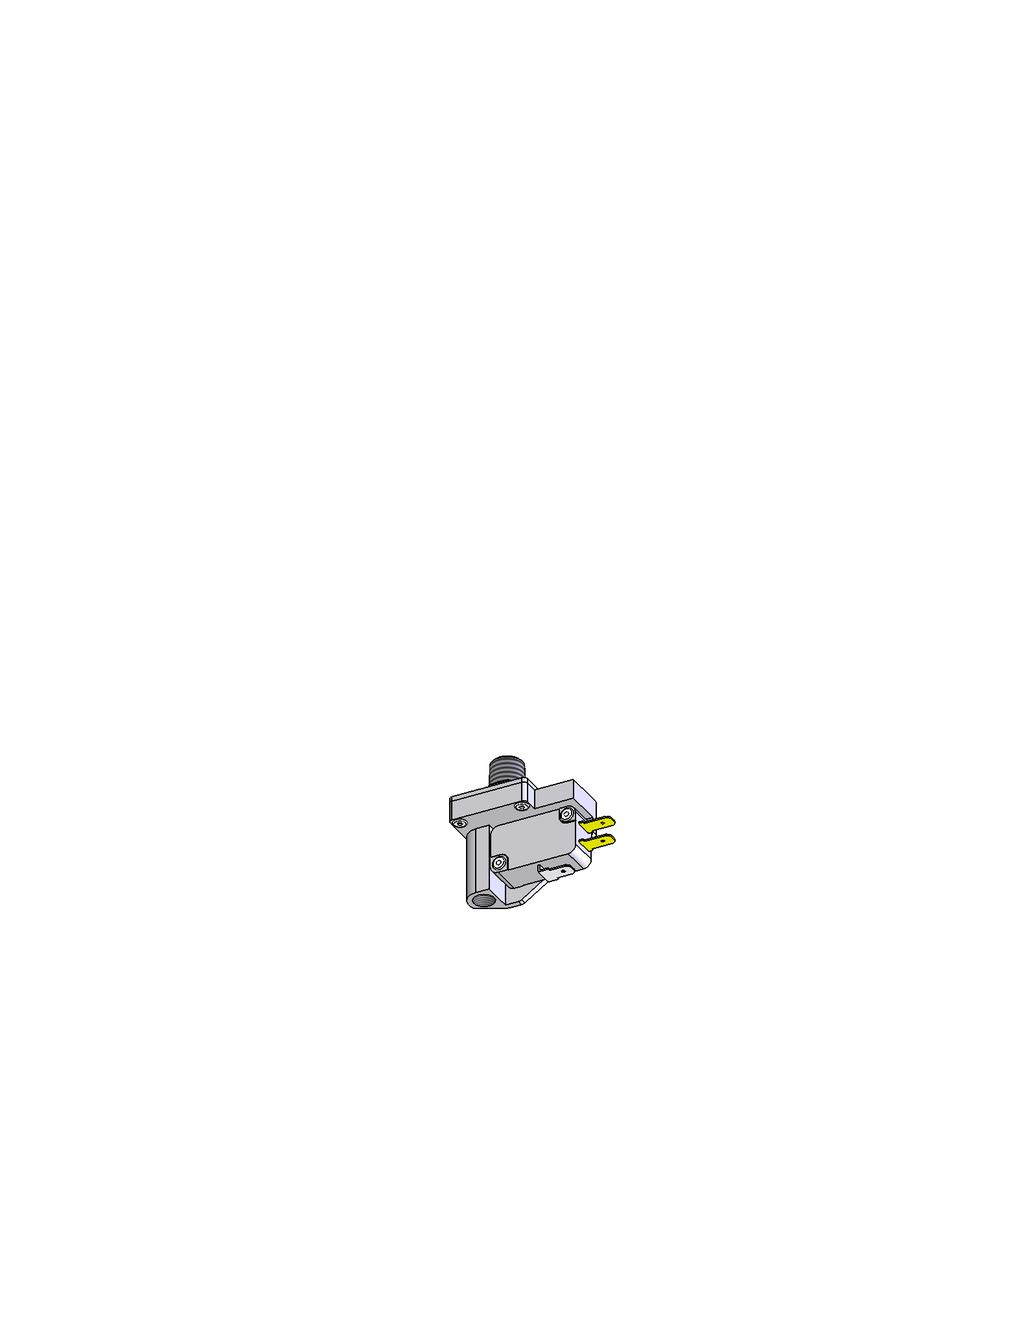 MECHANICAL PRESSURE SENSORS ELECTRICAL OUTPUT Electrical pressure sensors come with UL and CSA snap action silver contact SPDT (Single Pole Double Throw) switch with 0.187in (4.75mm) spade terminals.